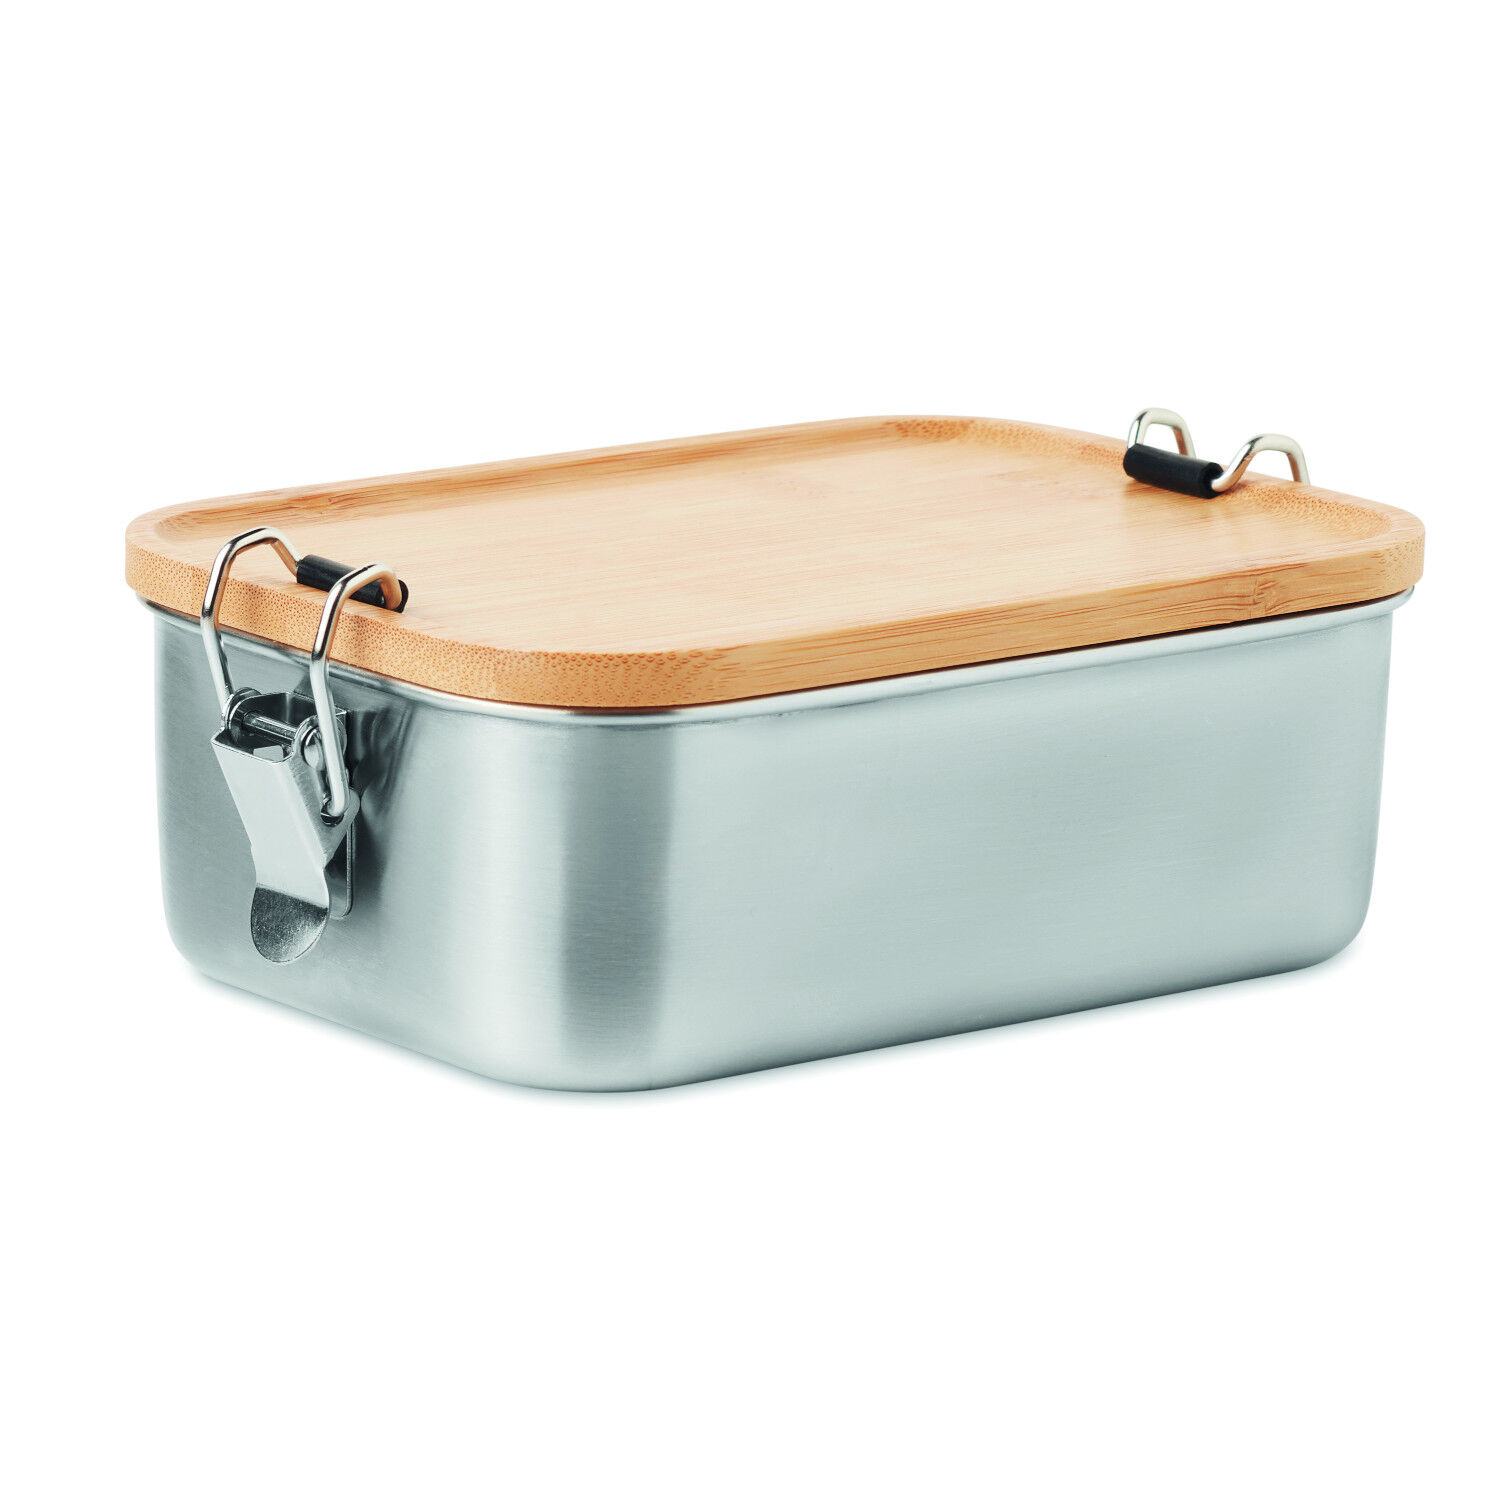 Sonabox Stainless Steel and Bamboo Lunchbox